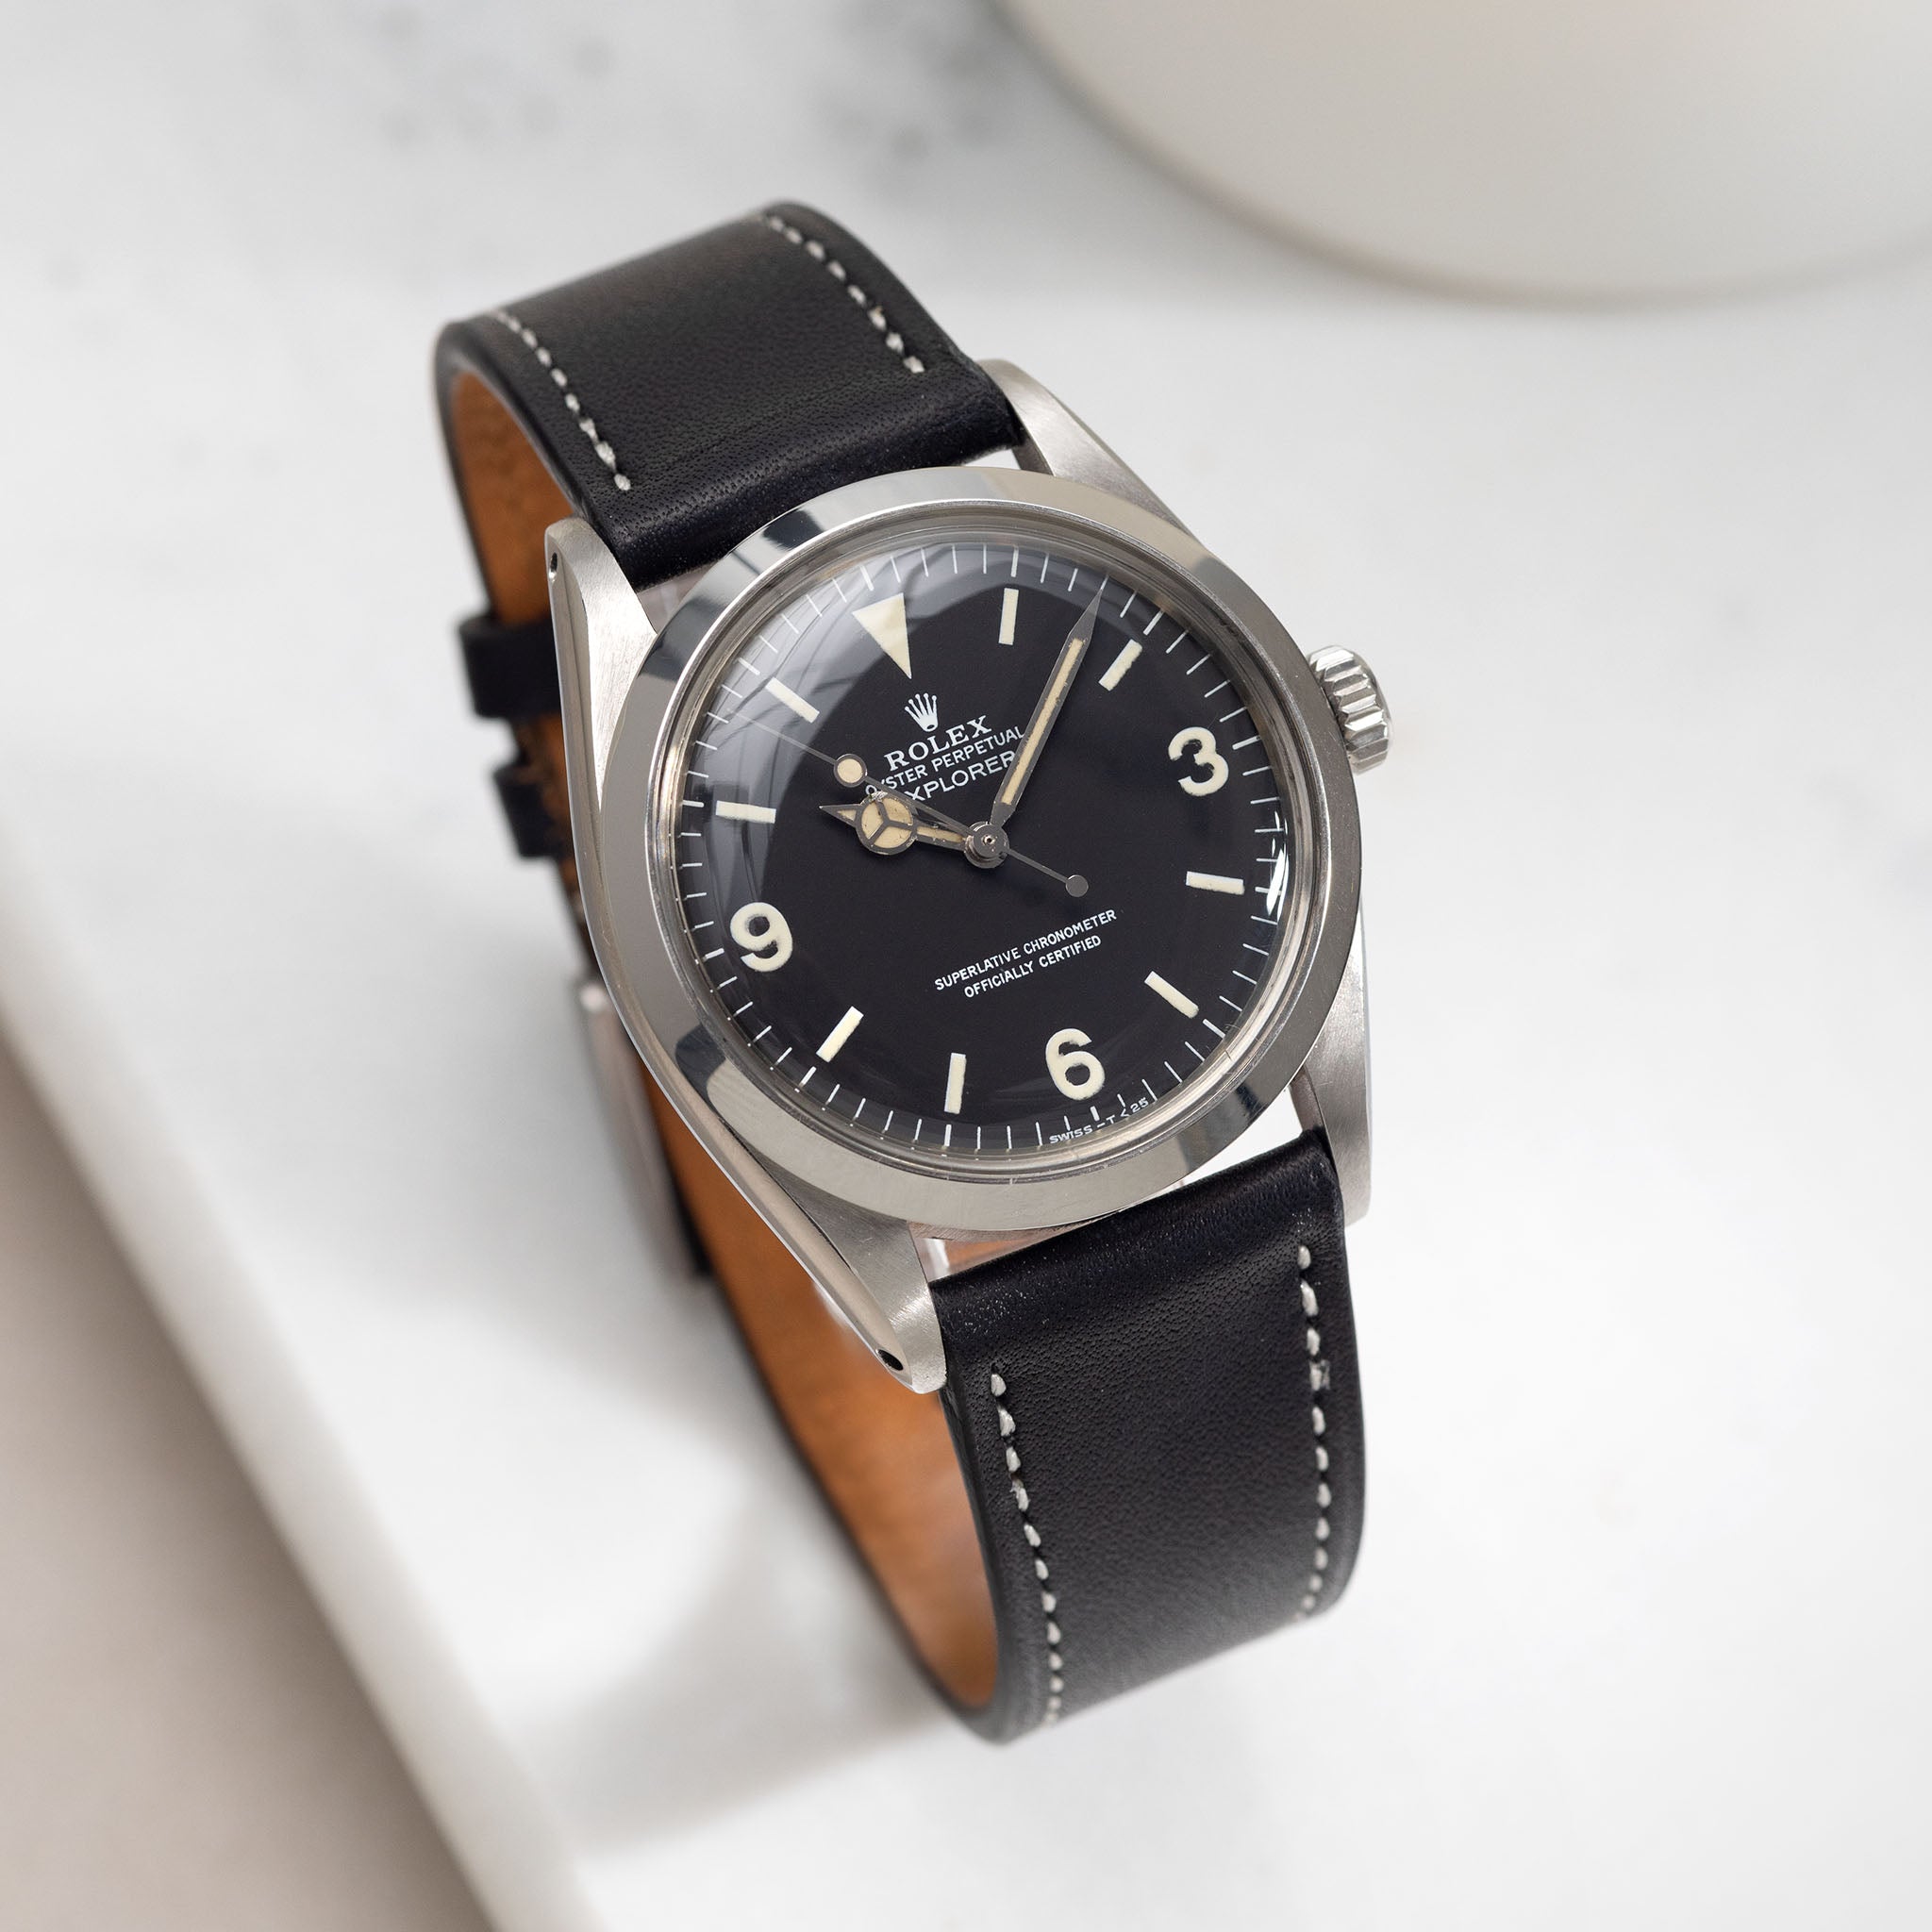 Black Exclusive Panerai style band in Barenia / Luxury Hermes French calf  leather